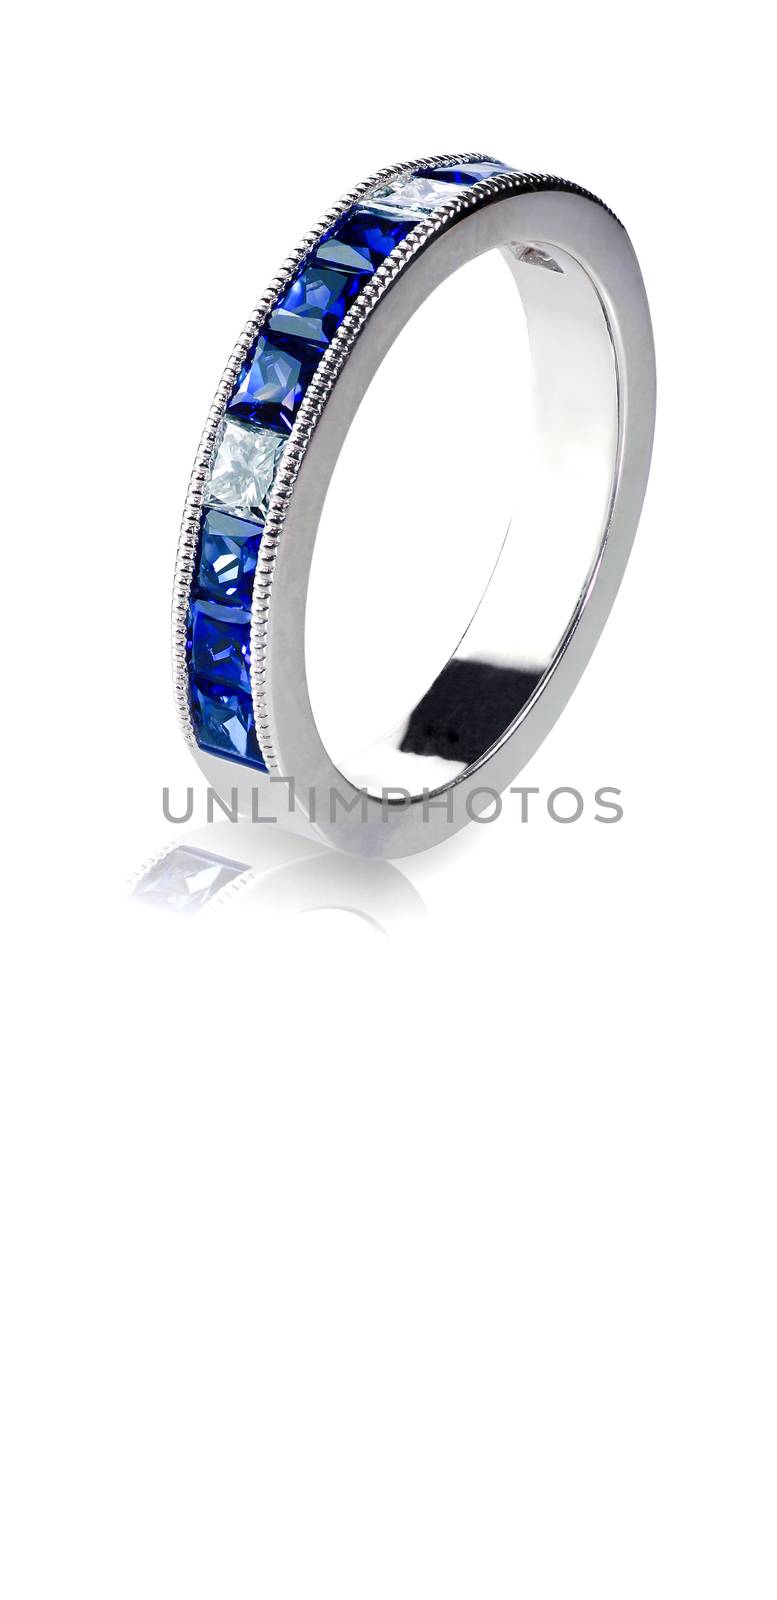 A blue Gemstone ring set in gold with diamonds. Isolated on white with a reflection.